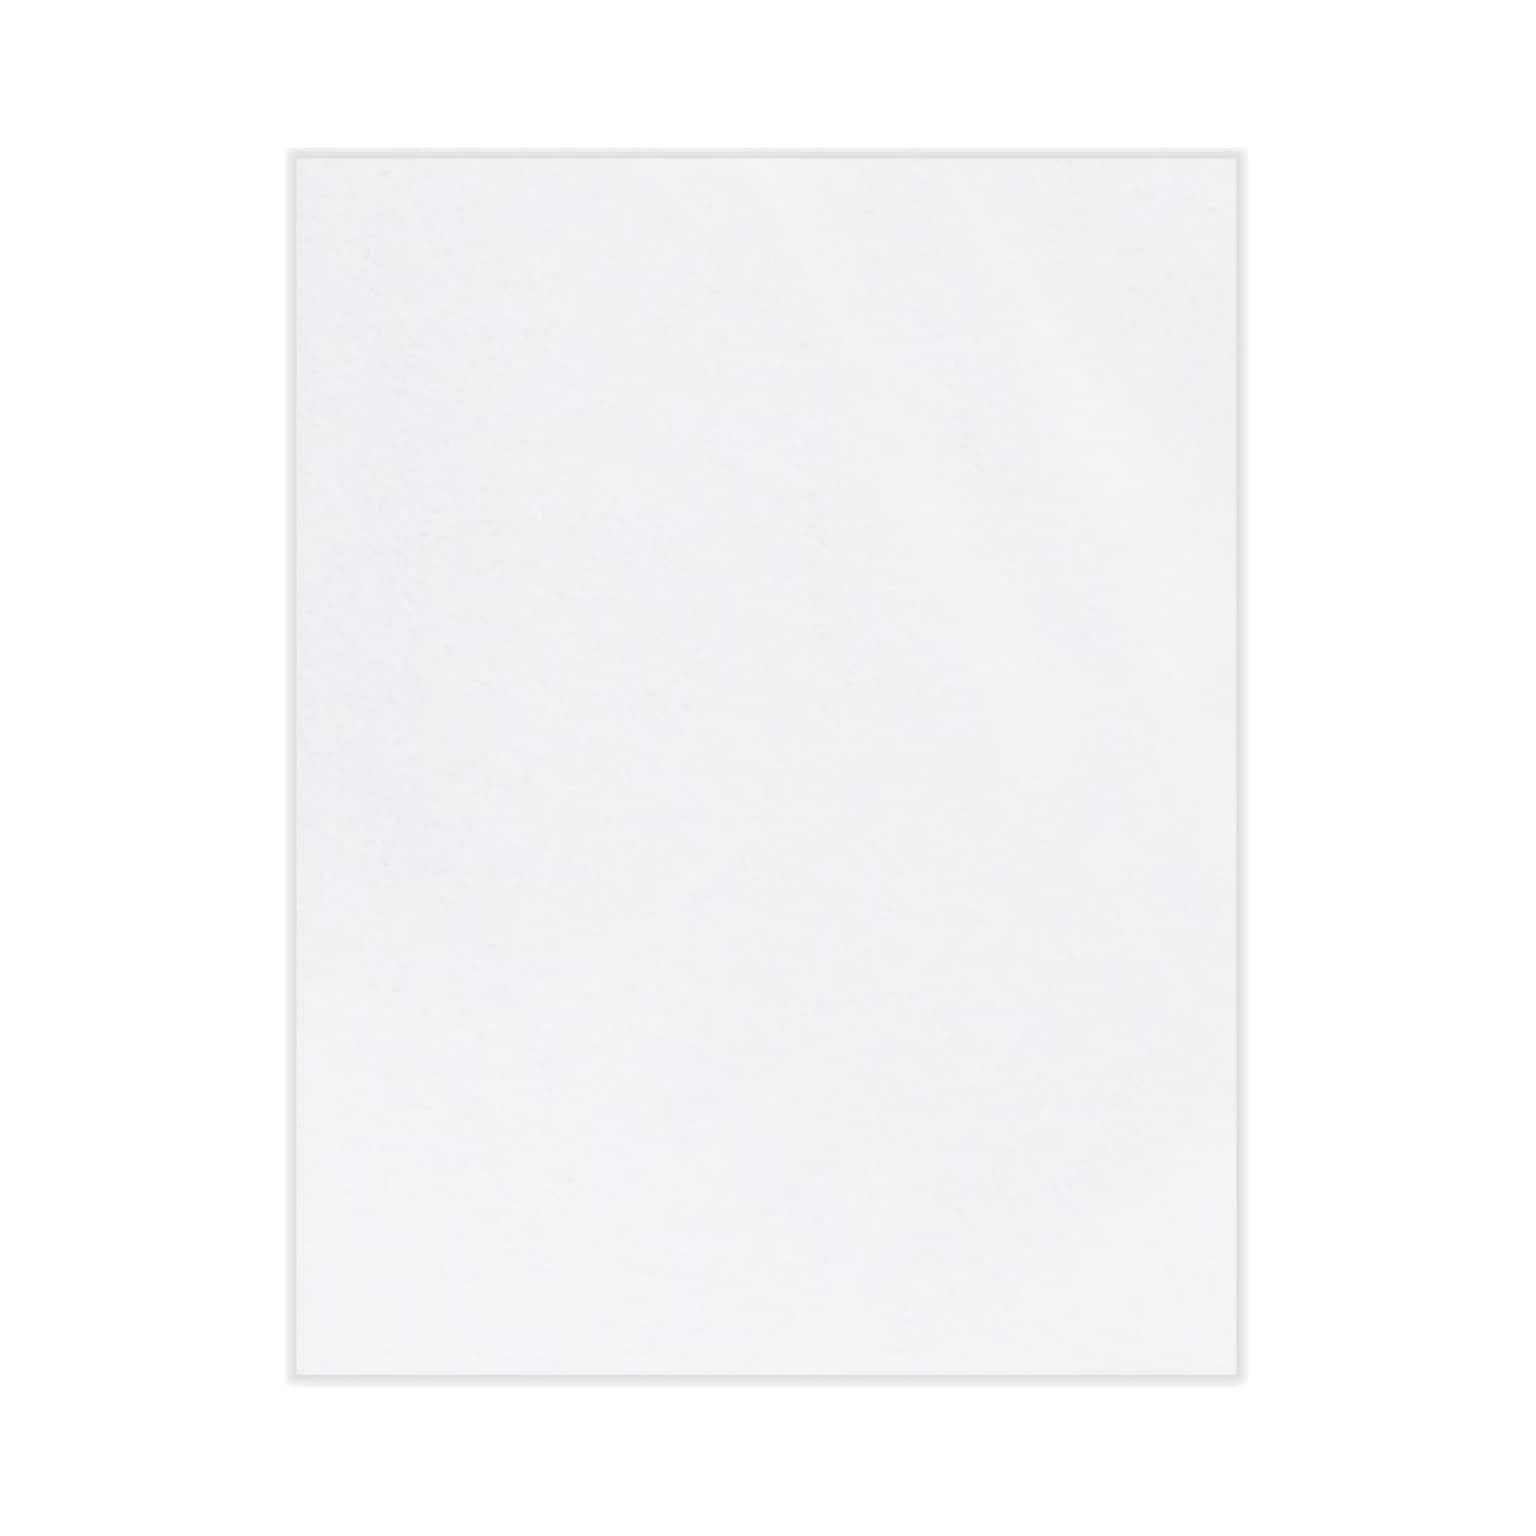 LUX 80lb. Bright White, 100% Recycled Cardstock, 8 1/2 x 11, Letter, 1000 Sheets